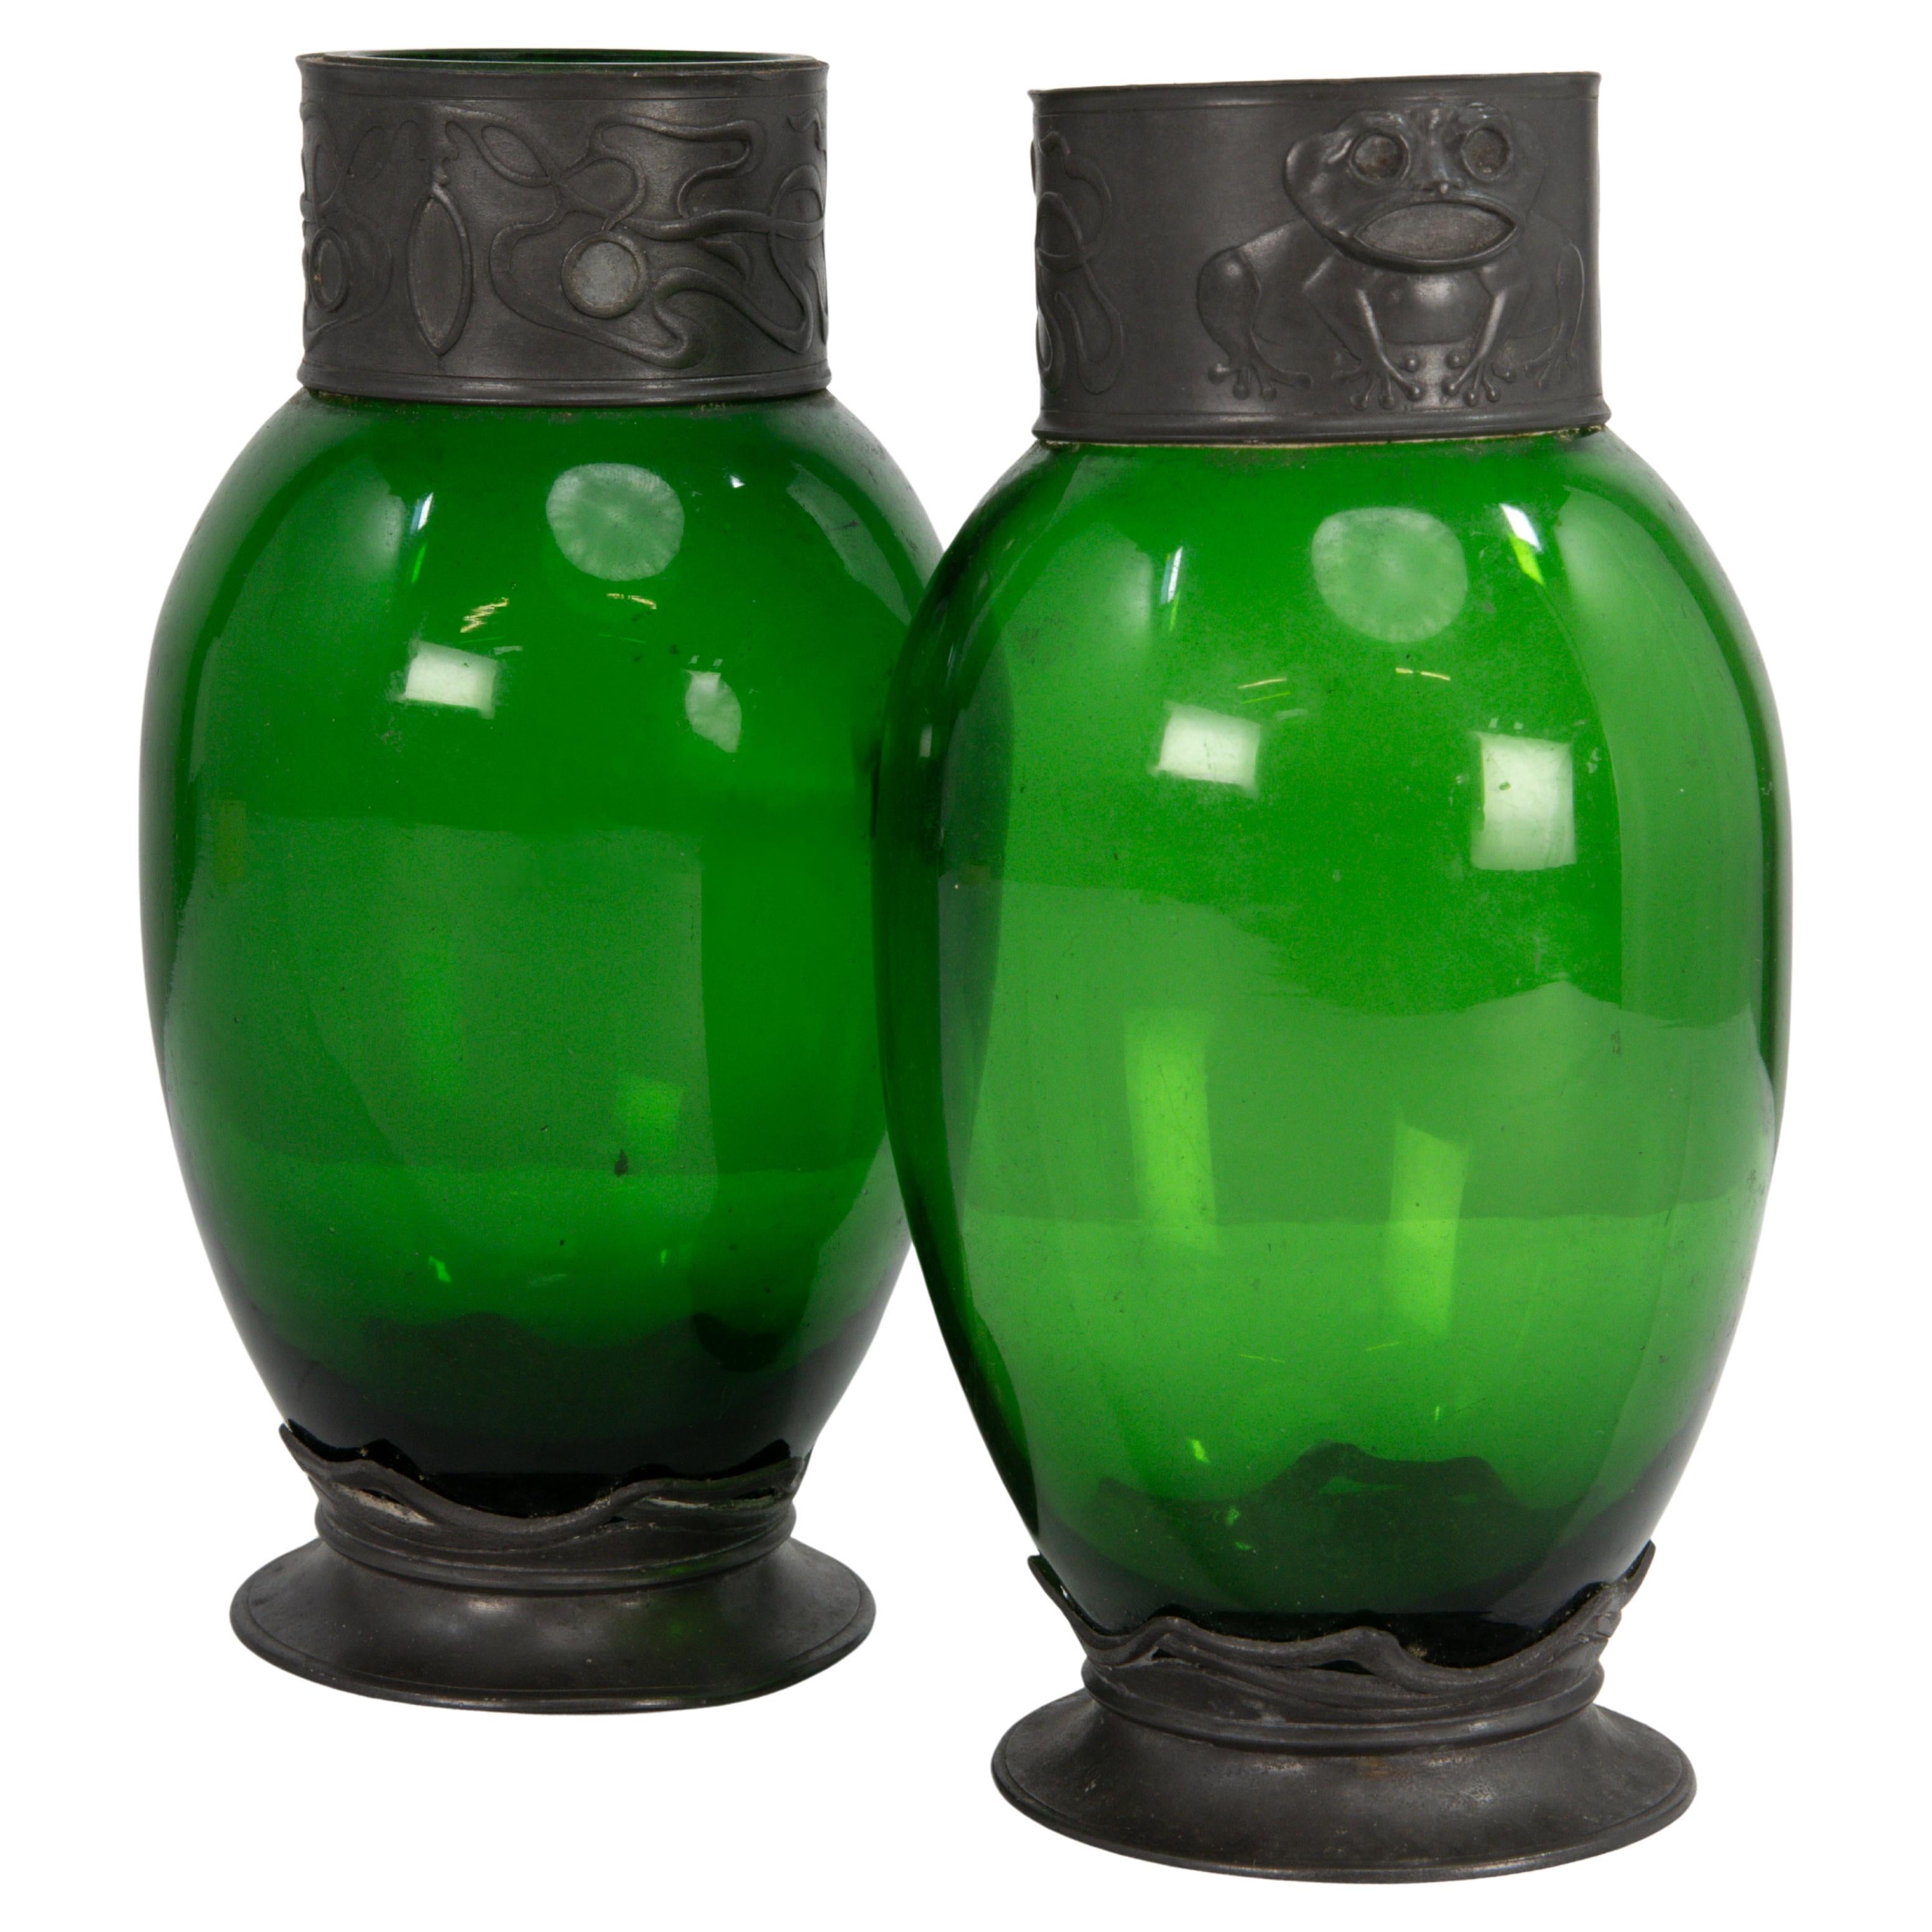 Osiris Pewter. A pair of Art Nouveau pewter & green glass vases with frog decor